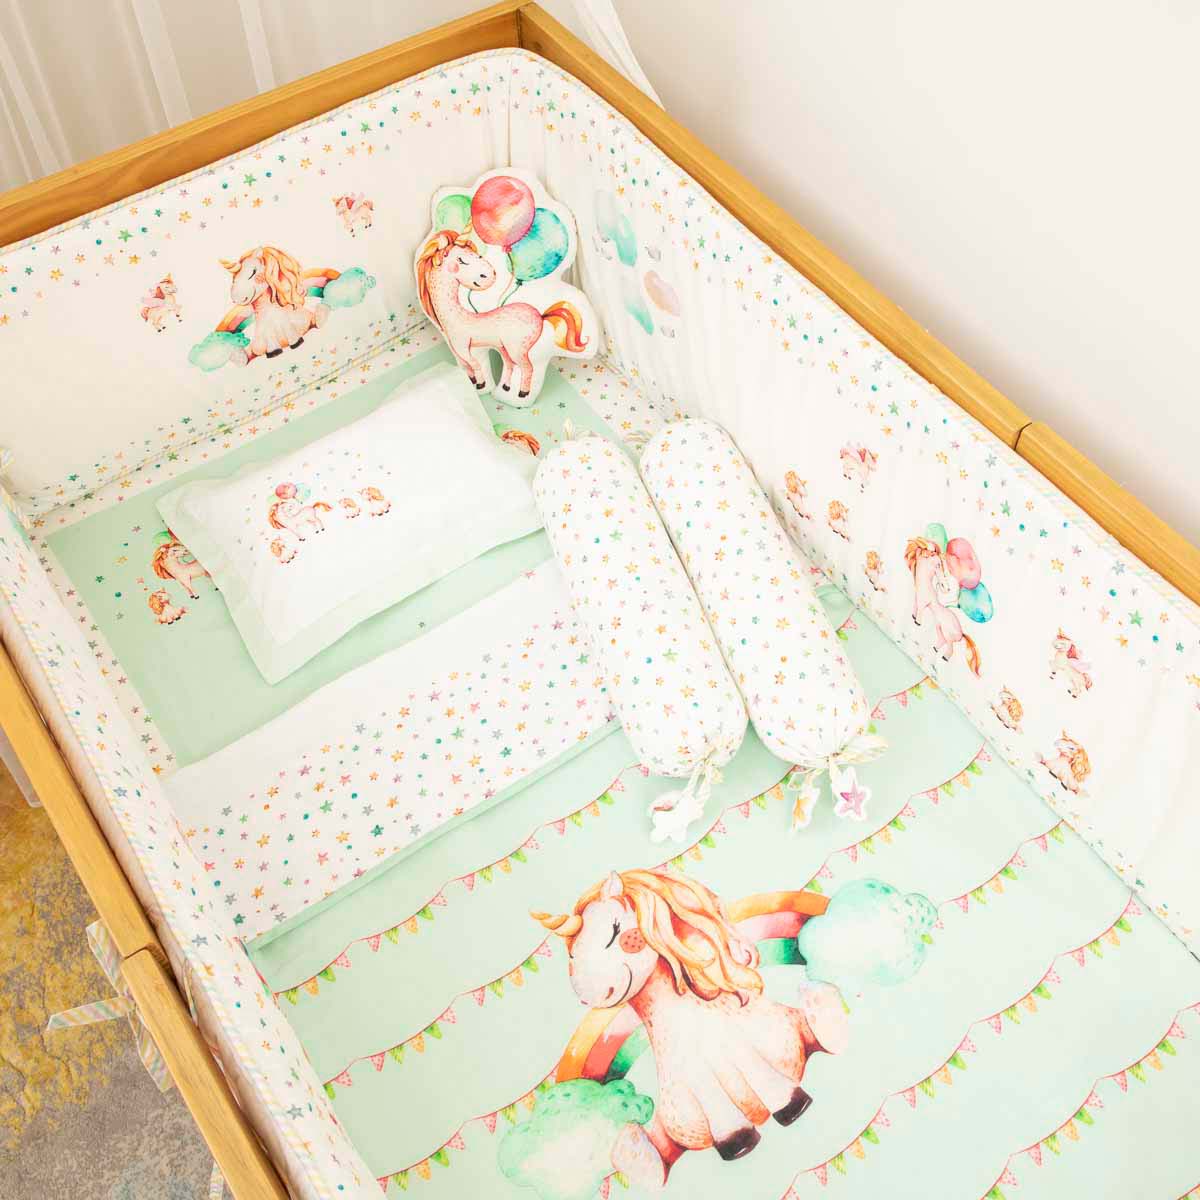 Miss Bella the Unicorn - Cot Bedding Set with Bumper - Green